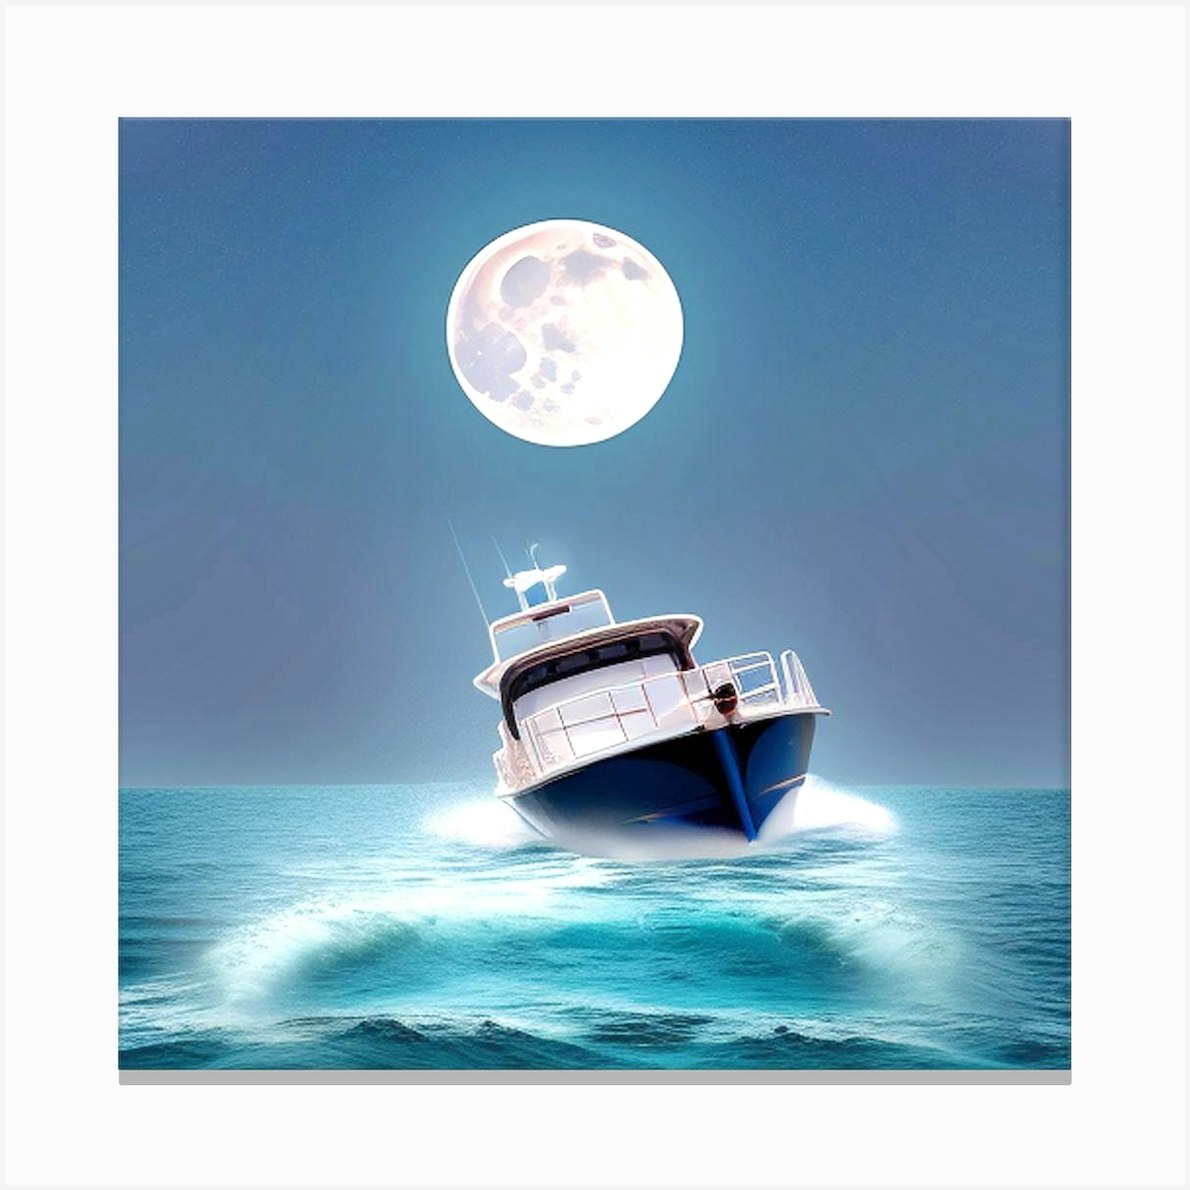 Moonlight Over The Ocean 3 Canvas Print by MdsArts - Fy